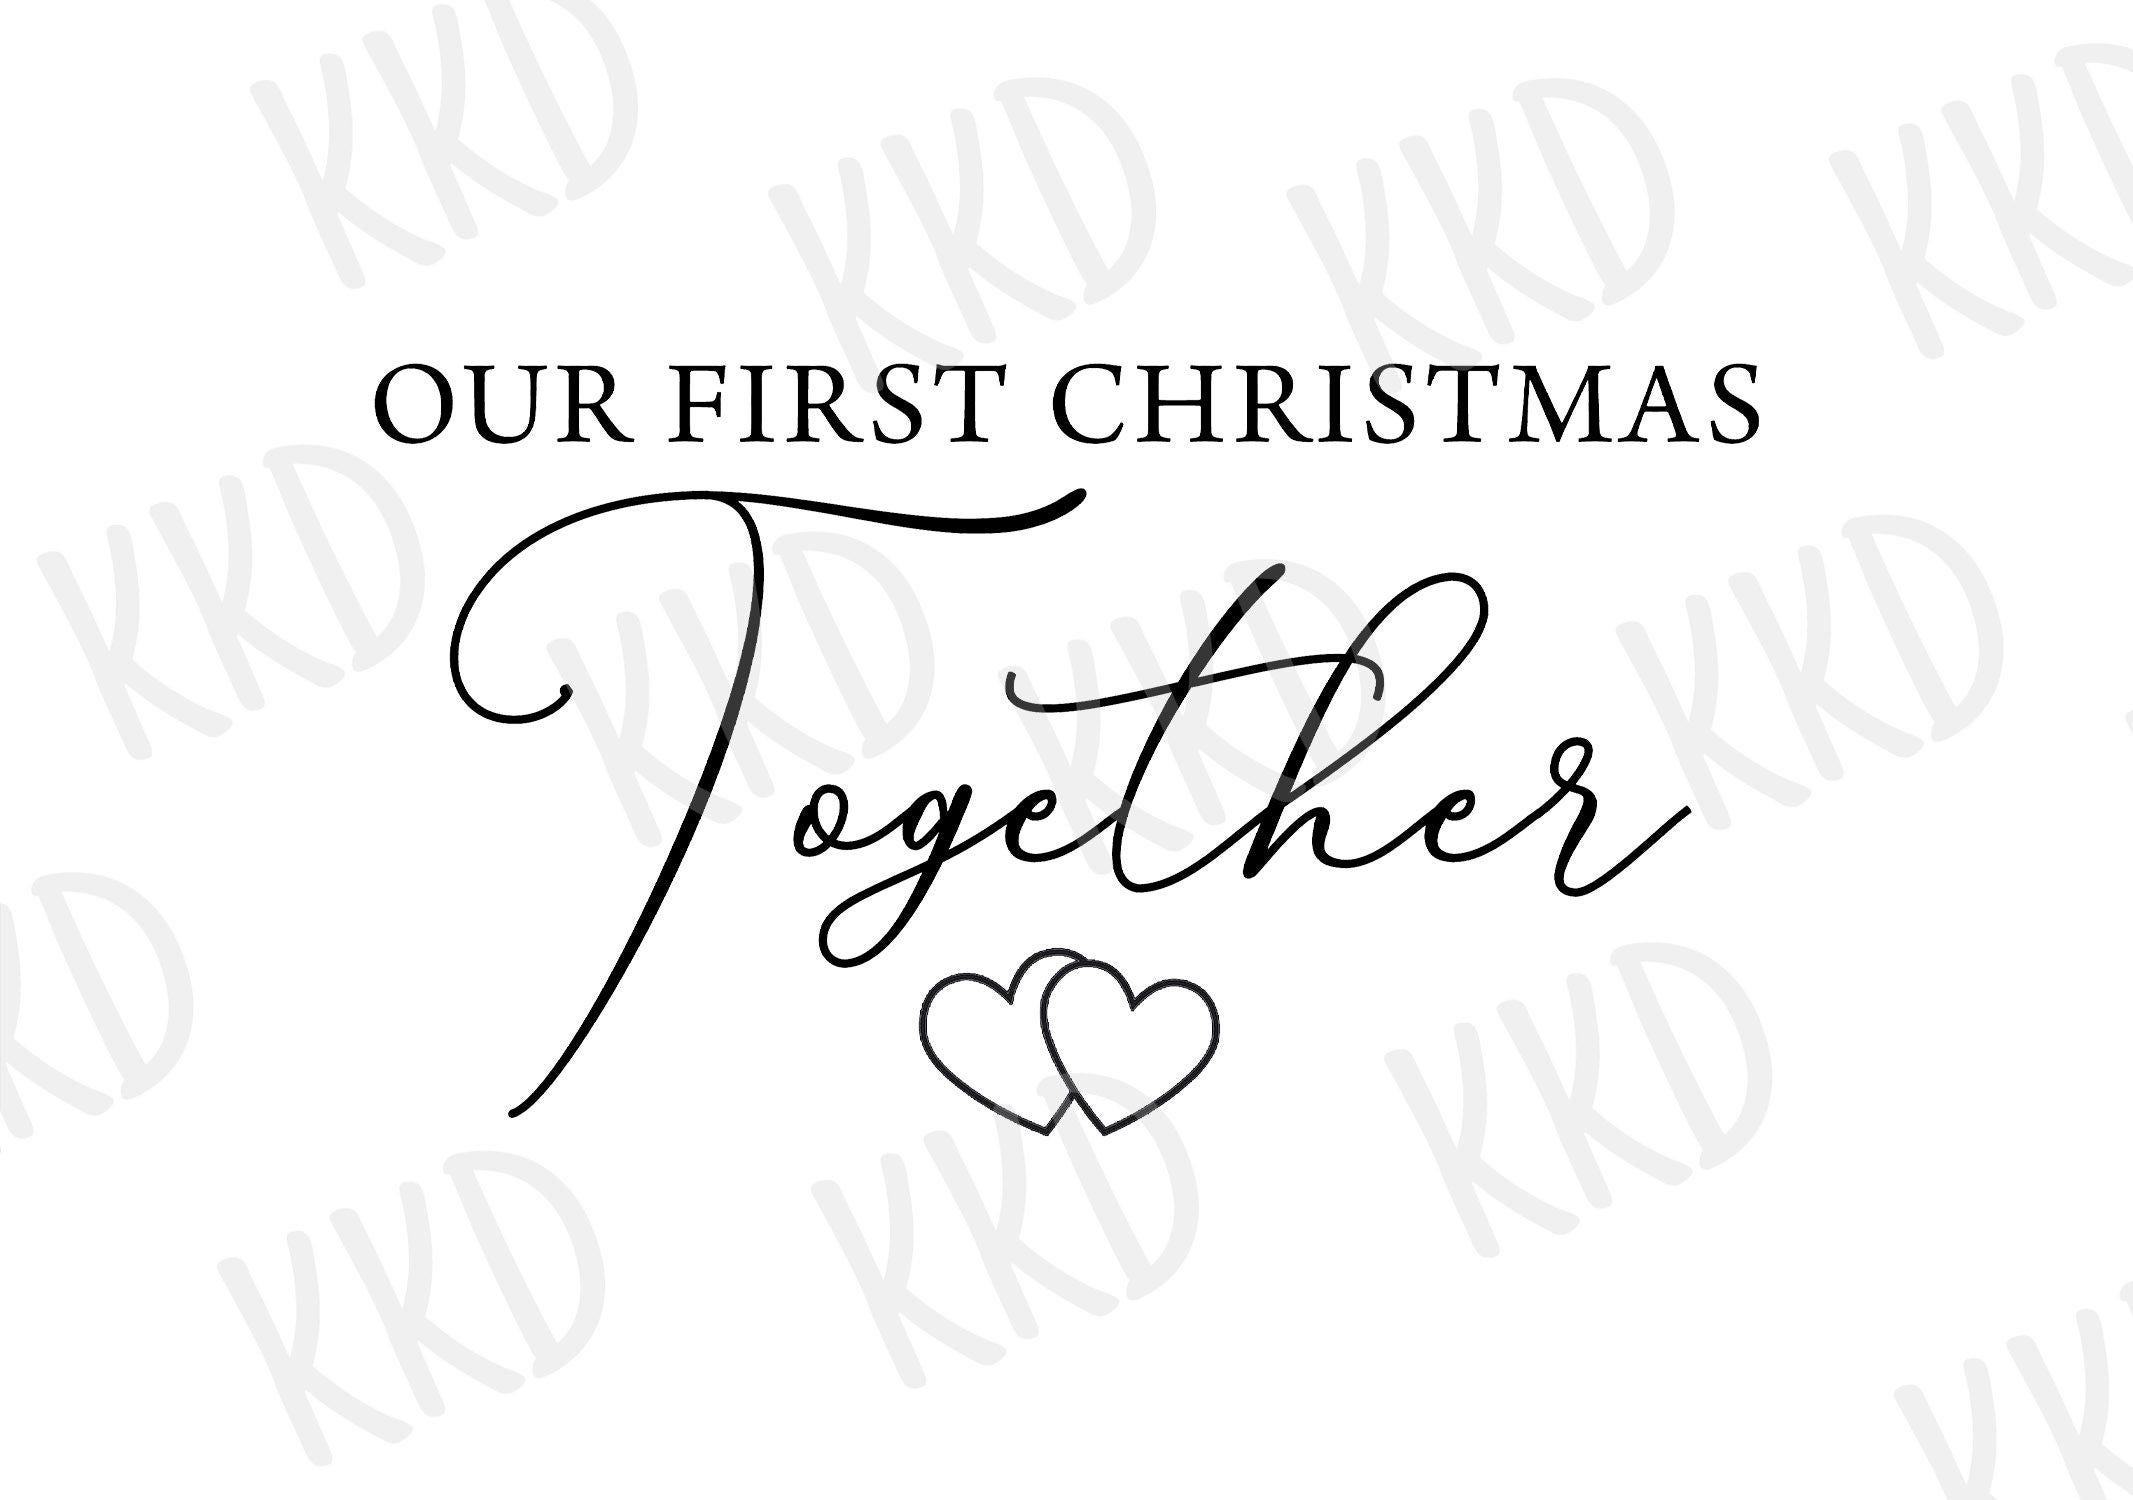 Our First Christmas Together Svg, Newlywed Svg, Christmas Ornament Svg, Mr And Mrs Svg, Christmas Decor Svg, Cricut Silhouette Cut Files